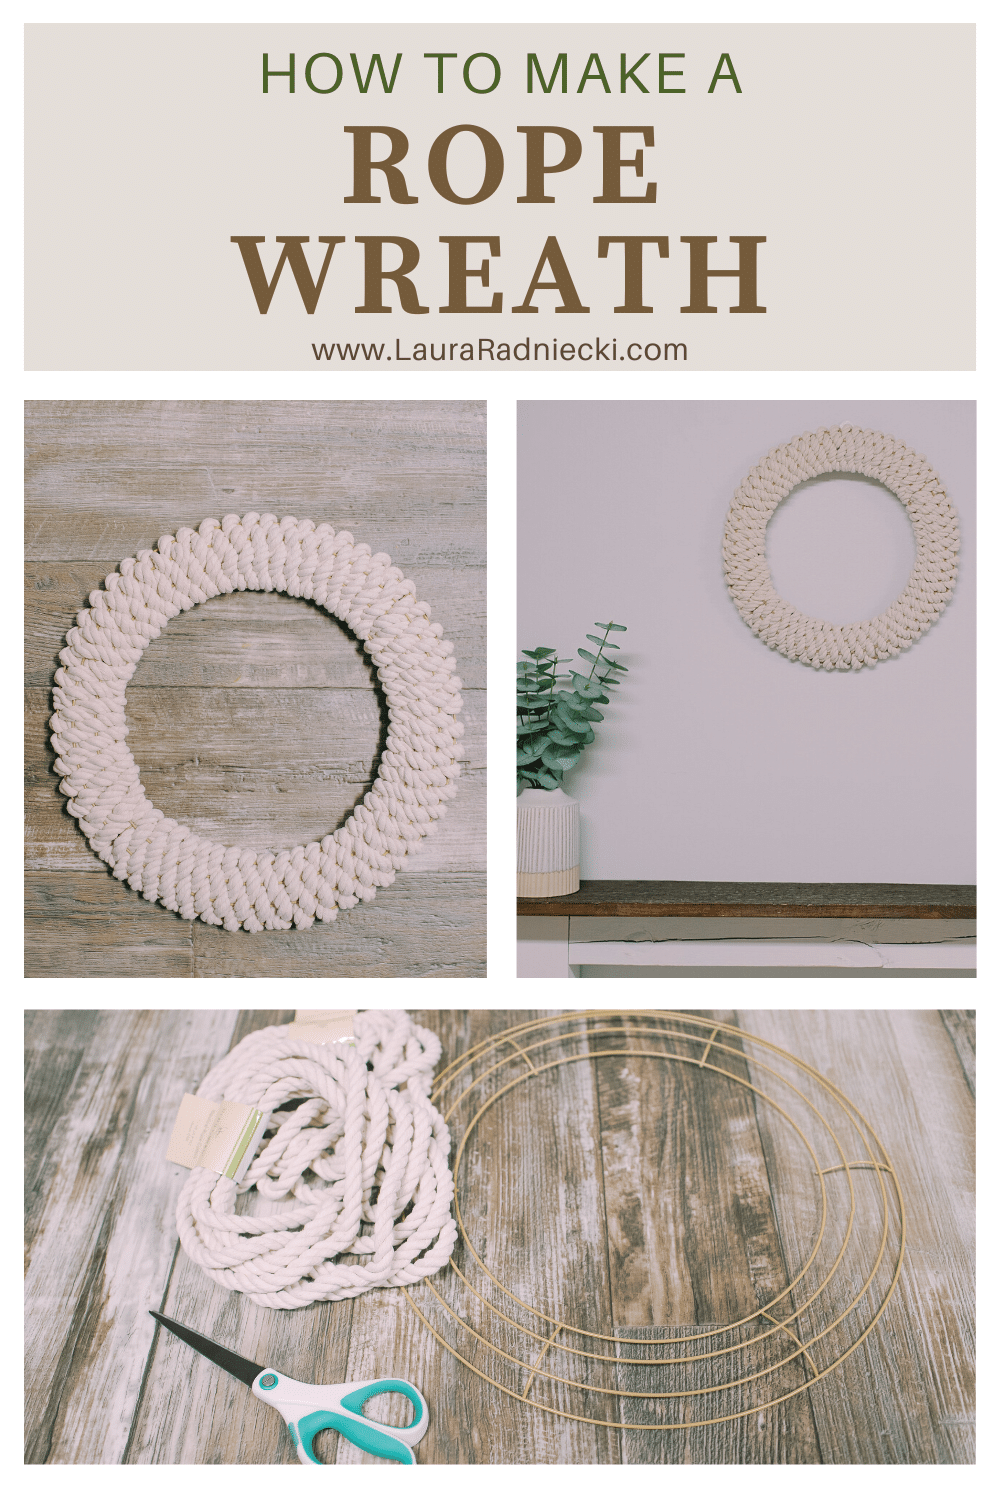 How to make a rope wreath using cotton rope from the Dollar Tree